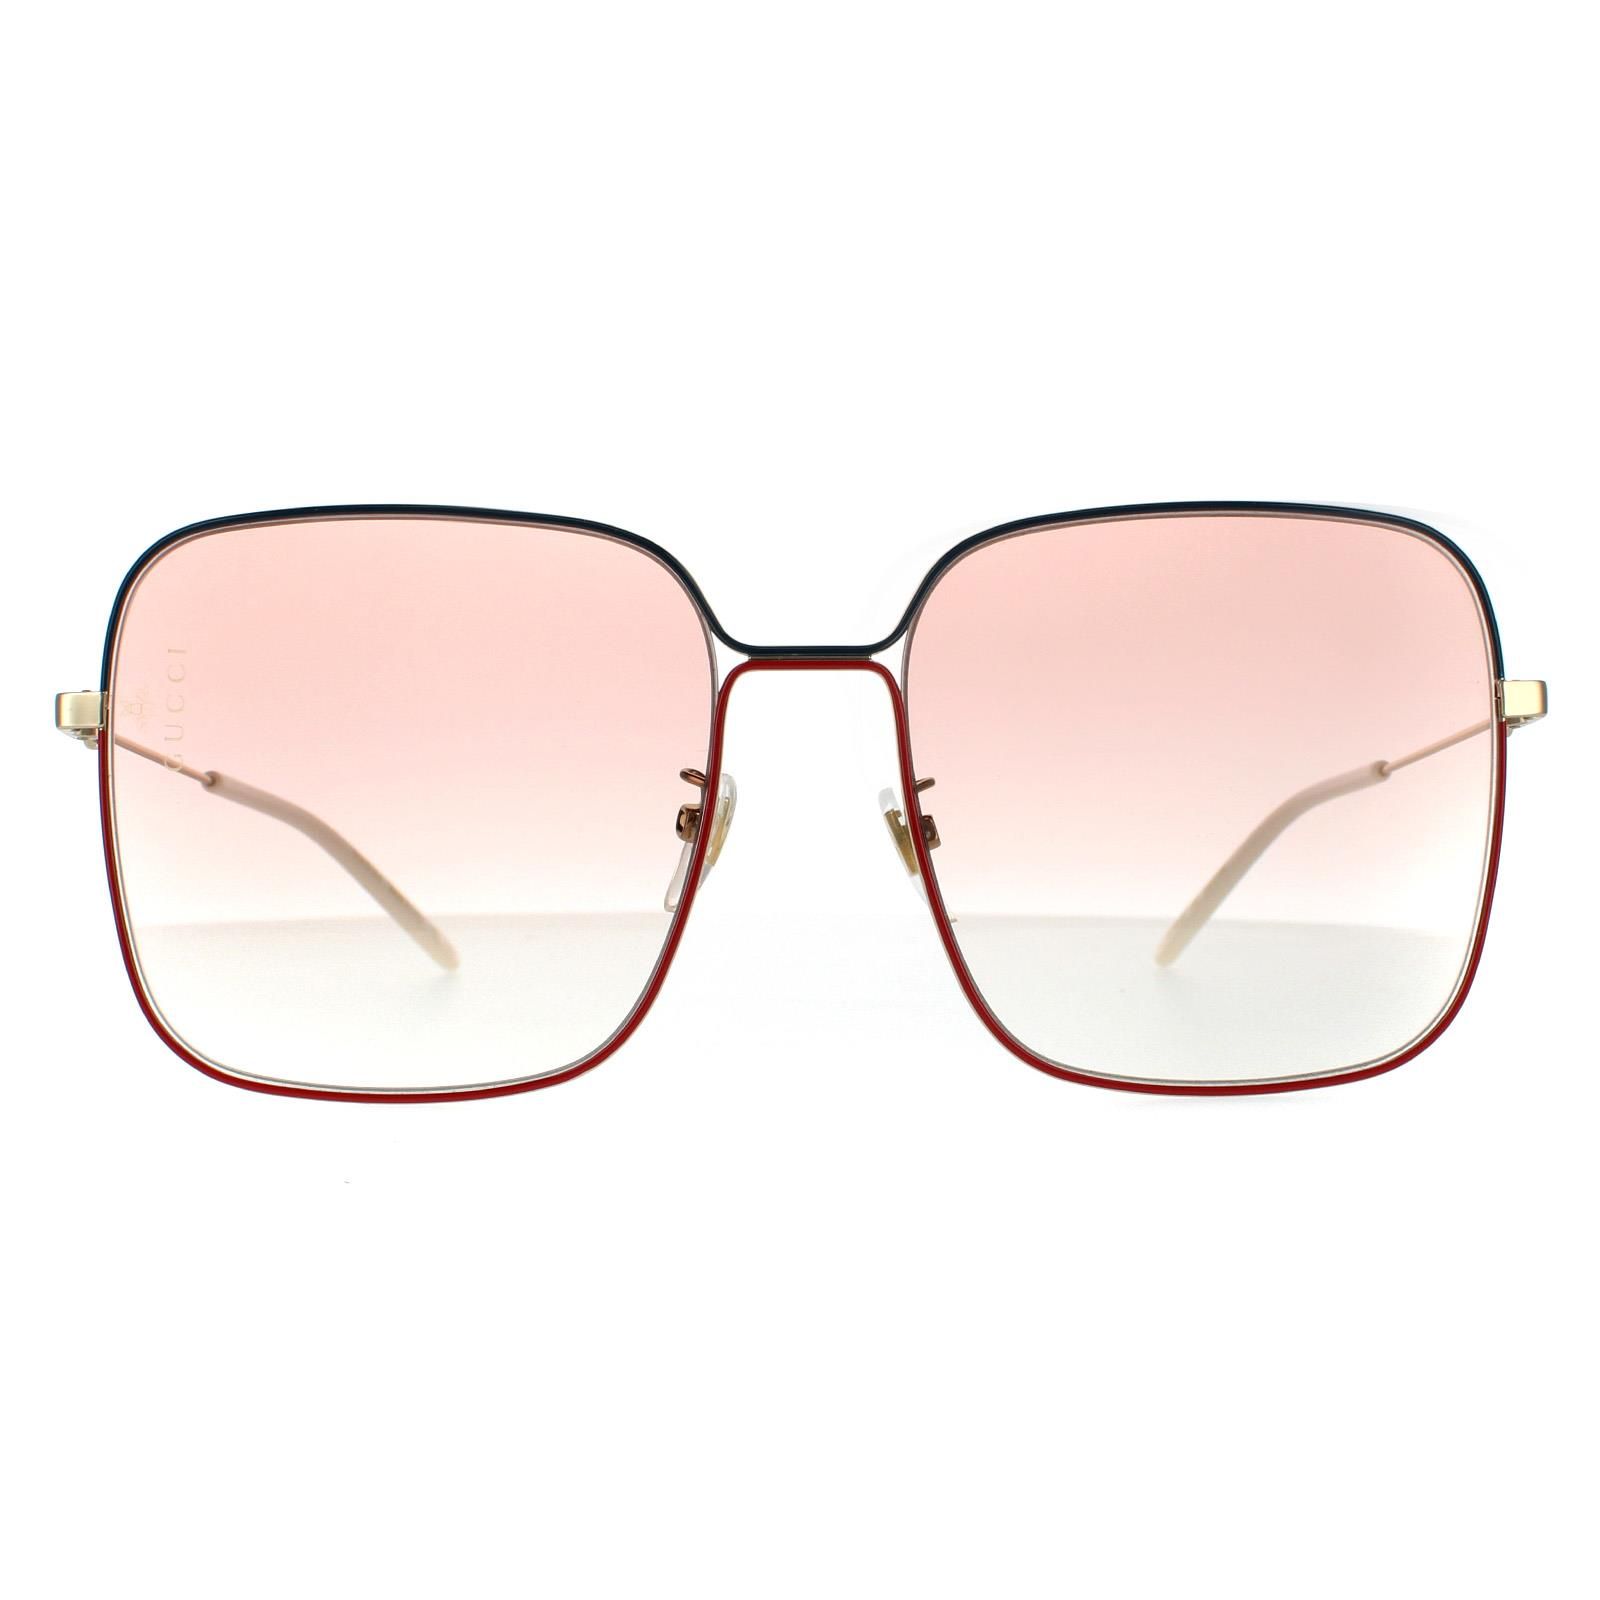 Gucci Square Womens Gold with Green and Red Pink Gradient Sunglasses GG0443S are an oversized square style crafted from lightweight acetate. Adjustable nose pads and plastic temple tips allow a personalised fit. To finish the look slender metal temples feature the Gucci emblem.